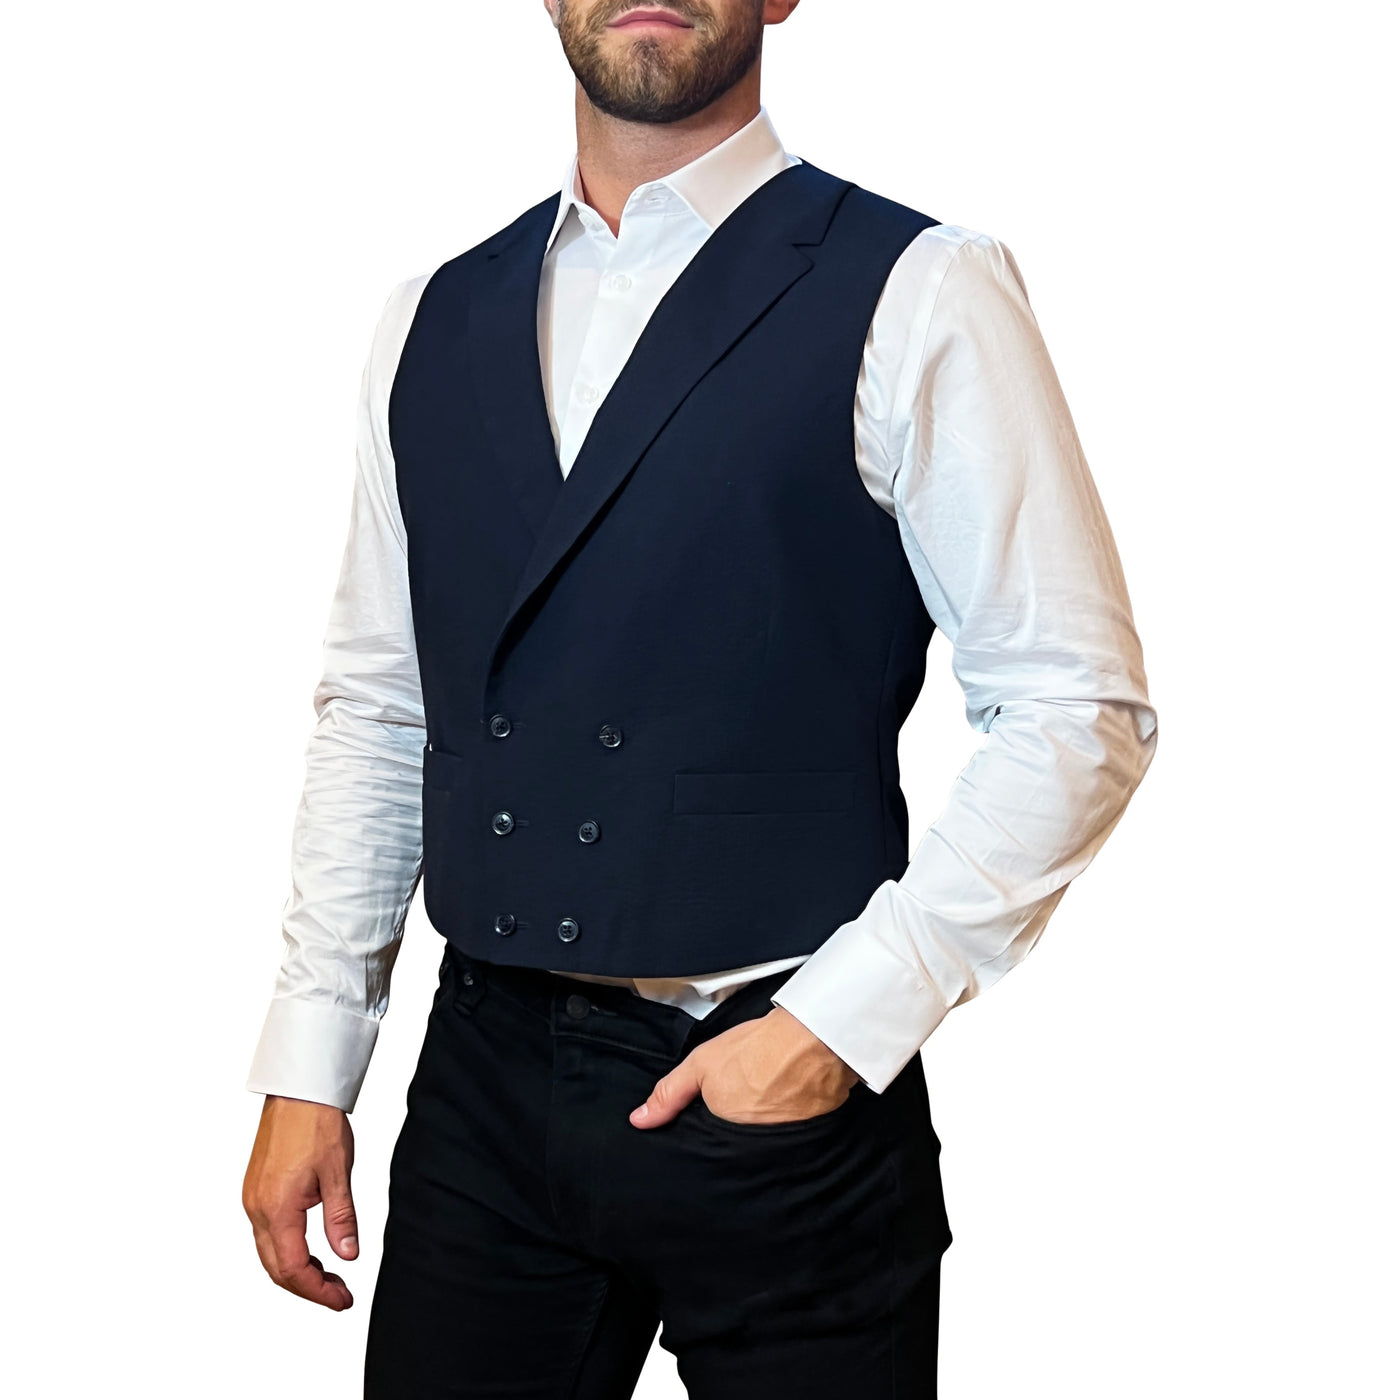 Gotstyle Fashion - NYFS Vests Seersucker Double Breasted Cotton Vest - Navy